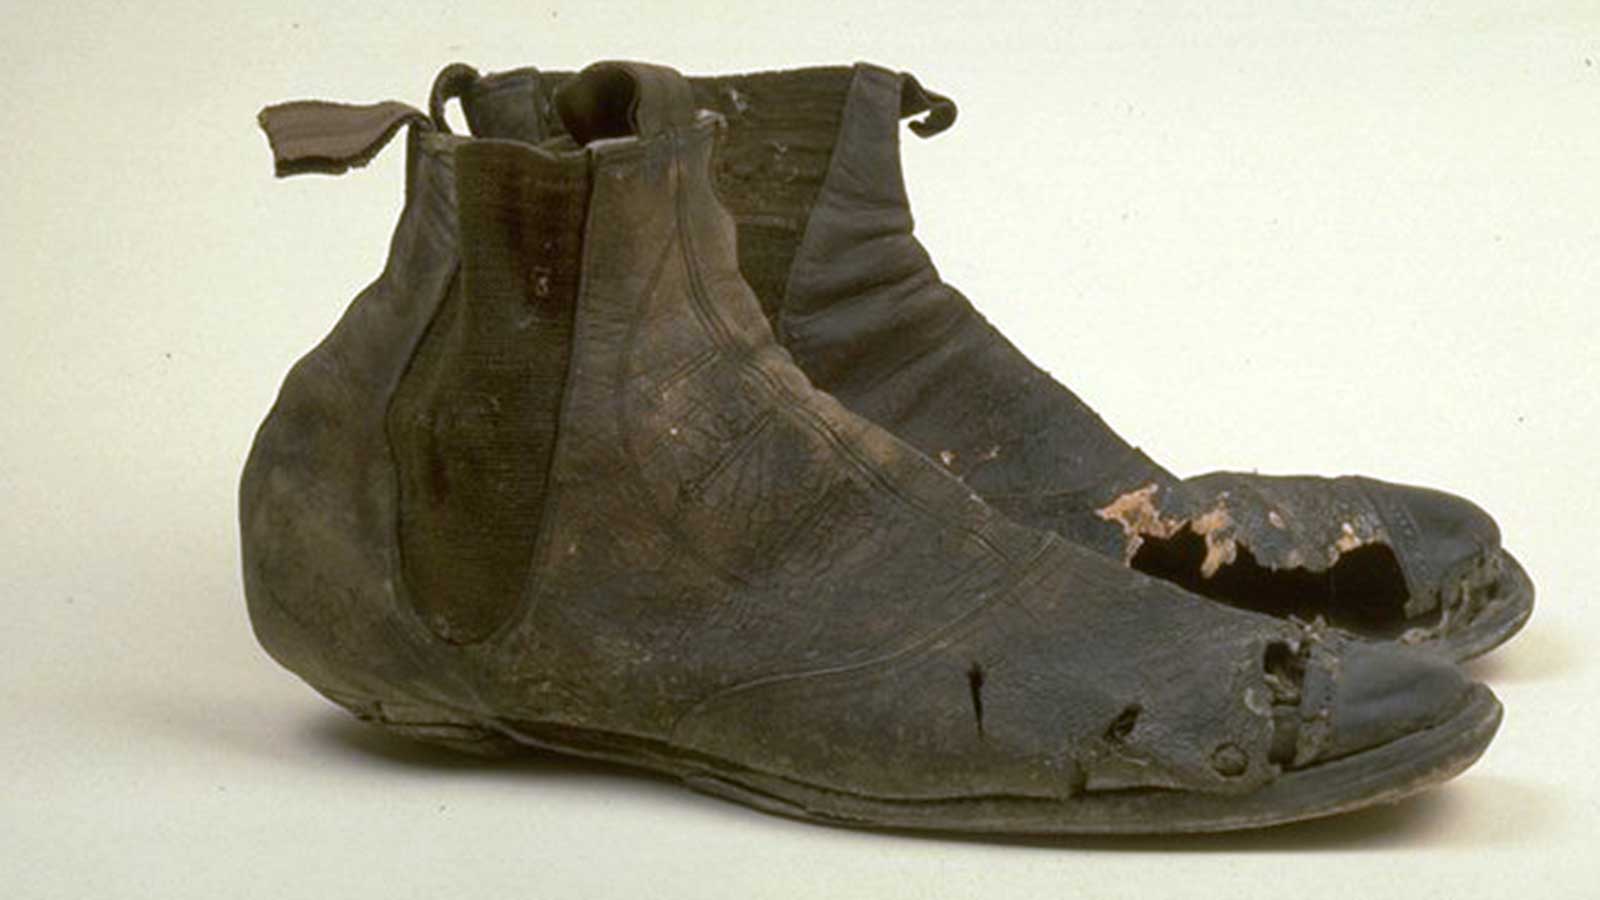 Boots found in the roof of the Savoy chapel, 19th century